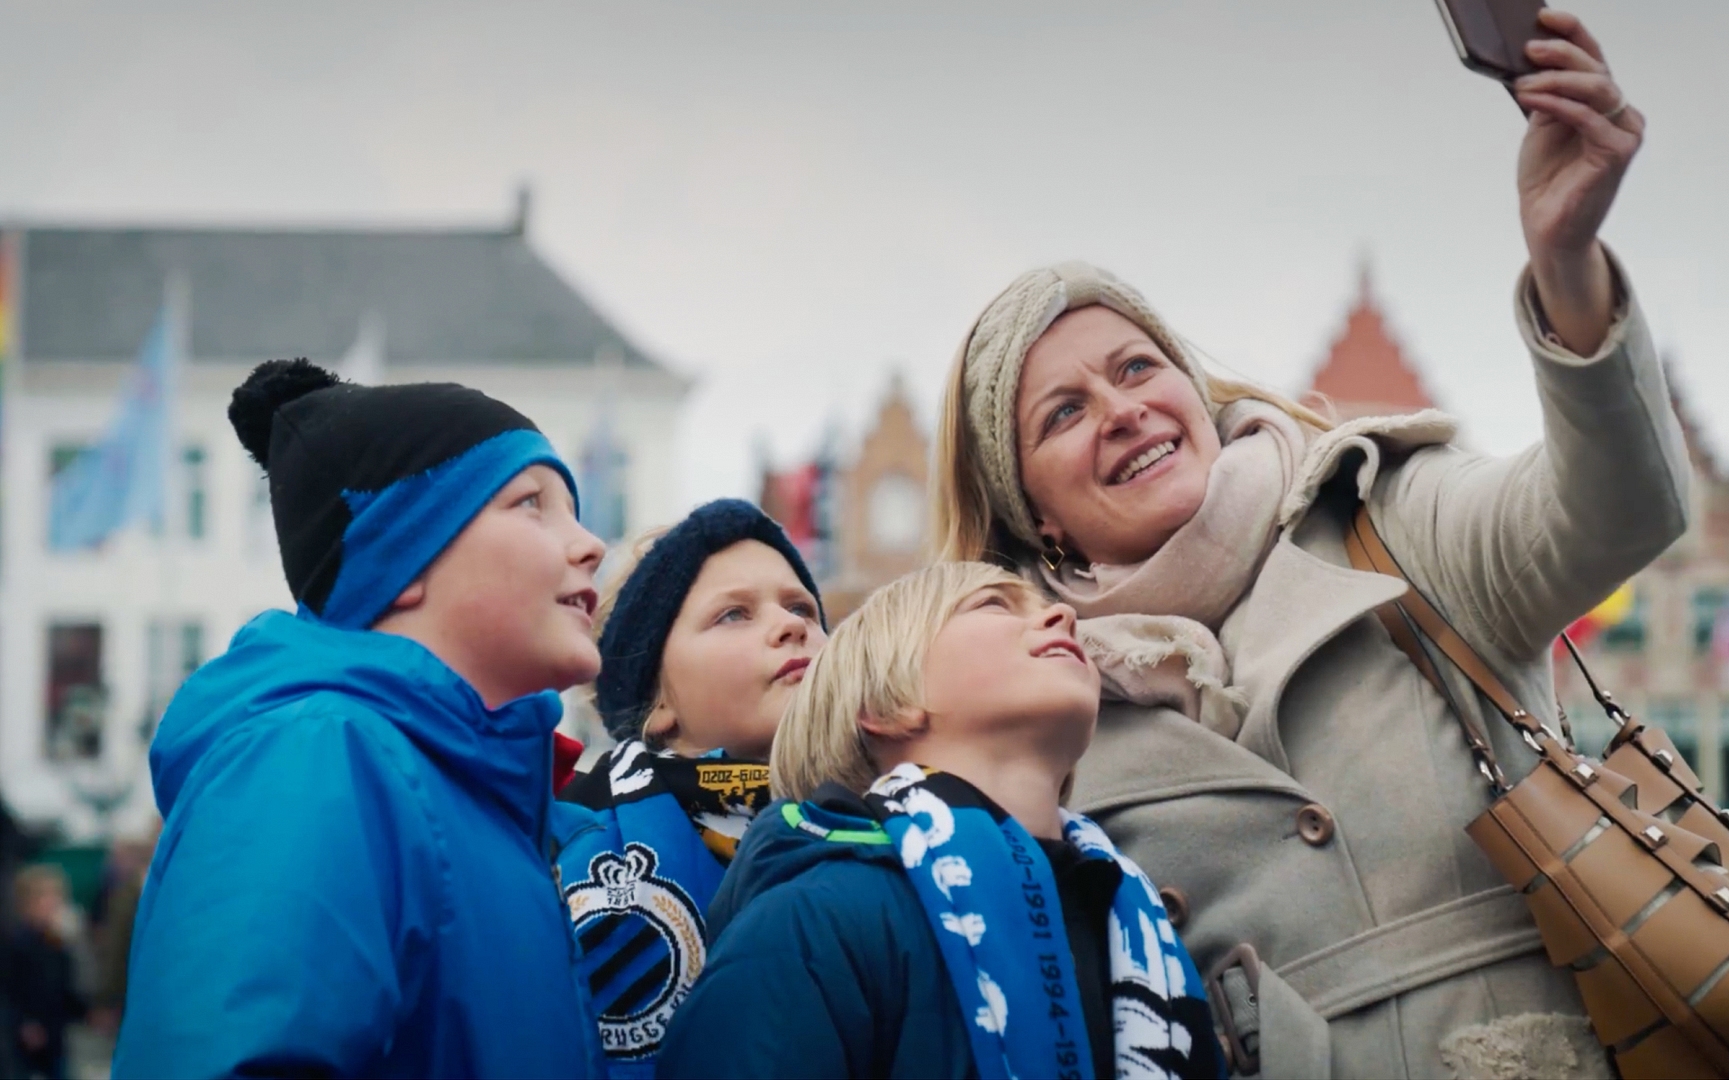 Celebrating 130 years Club Brugge with an interactive AR experience